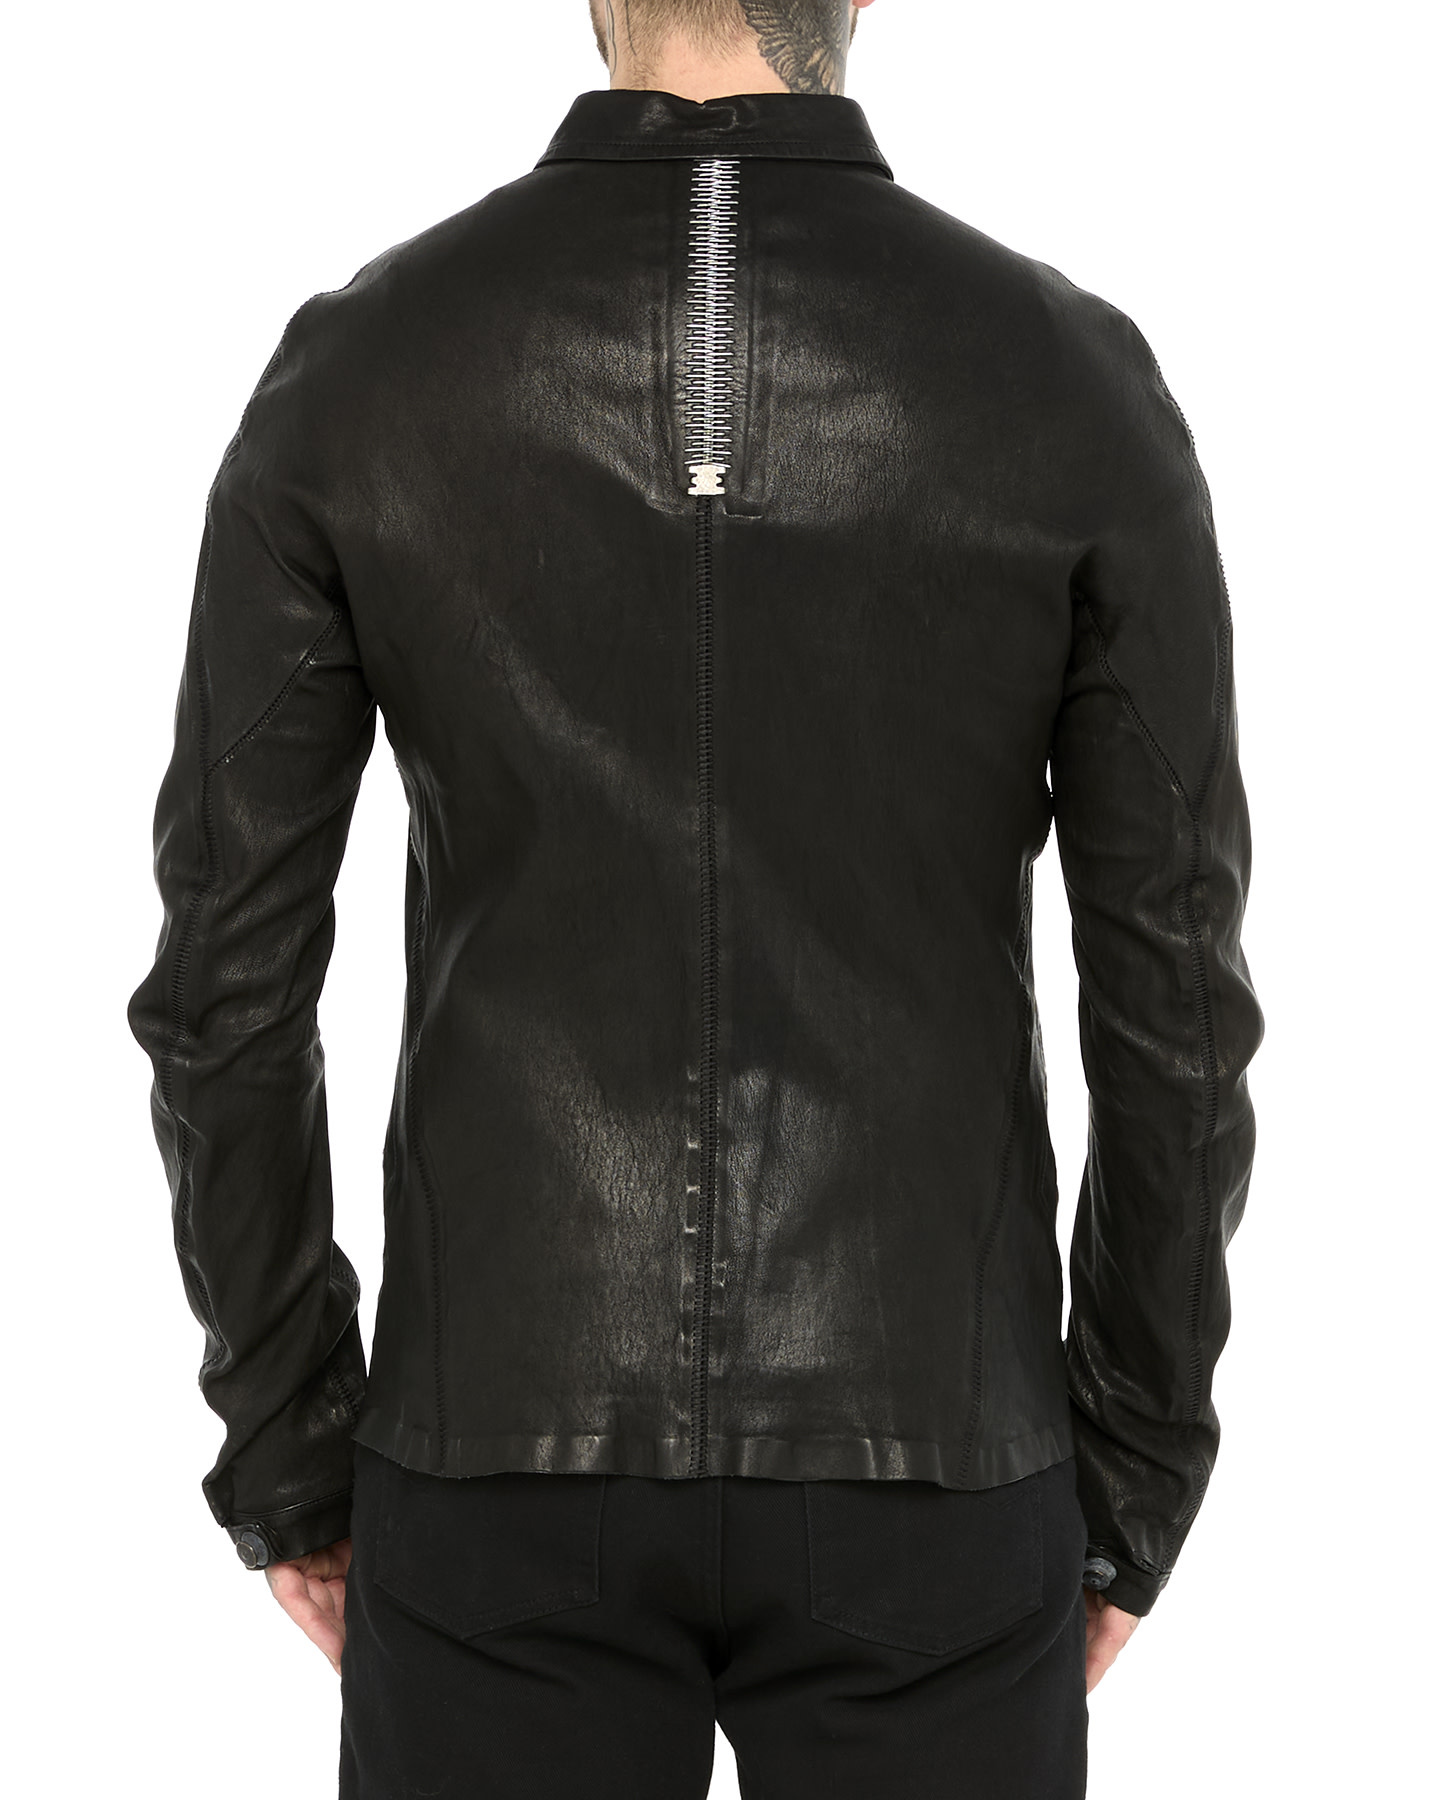 Attentif Stretch Leather Jacket by Isaac Sellam | Shop Untitled 